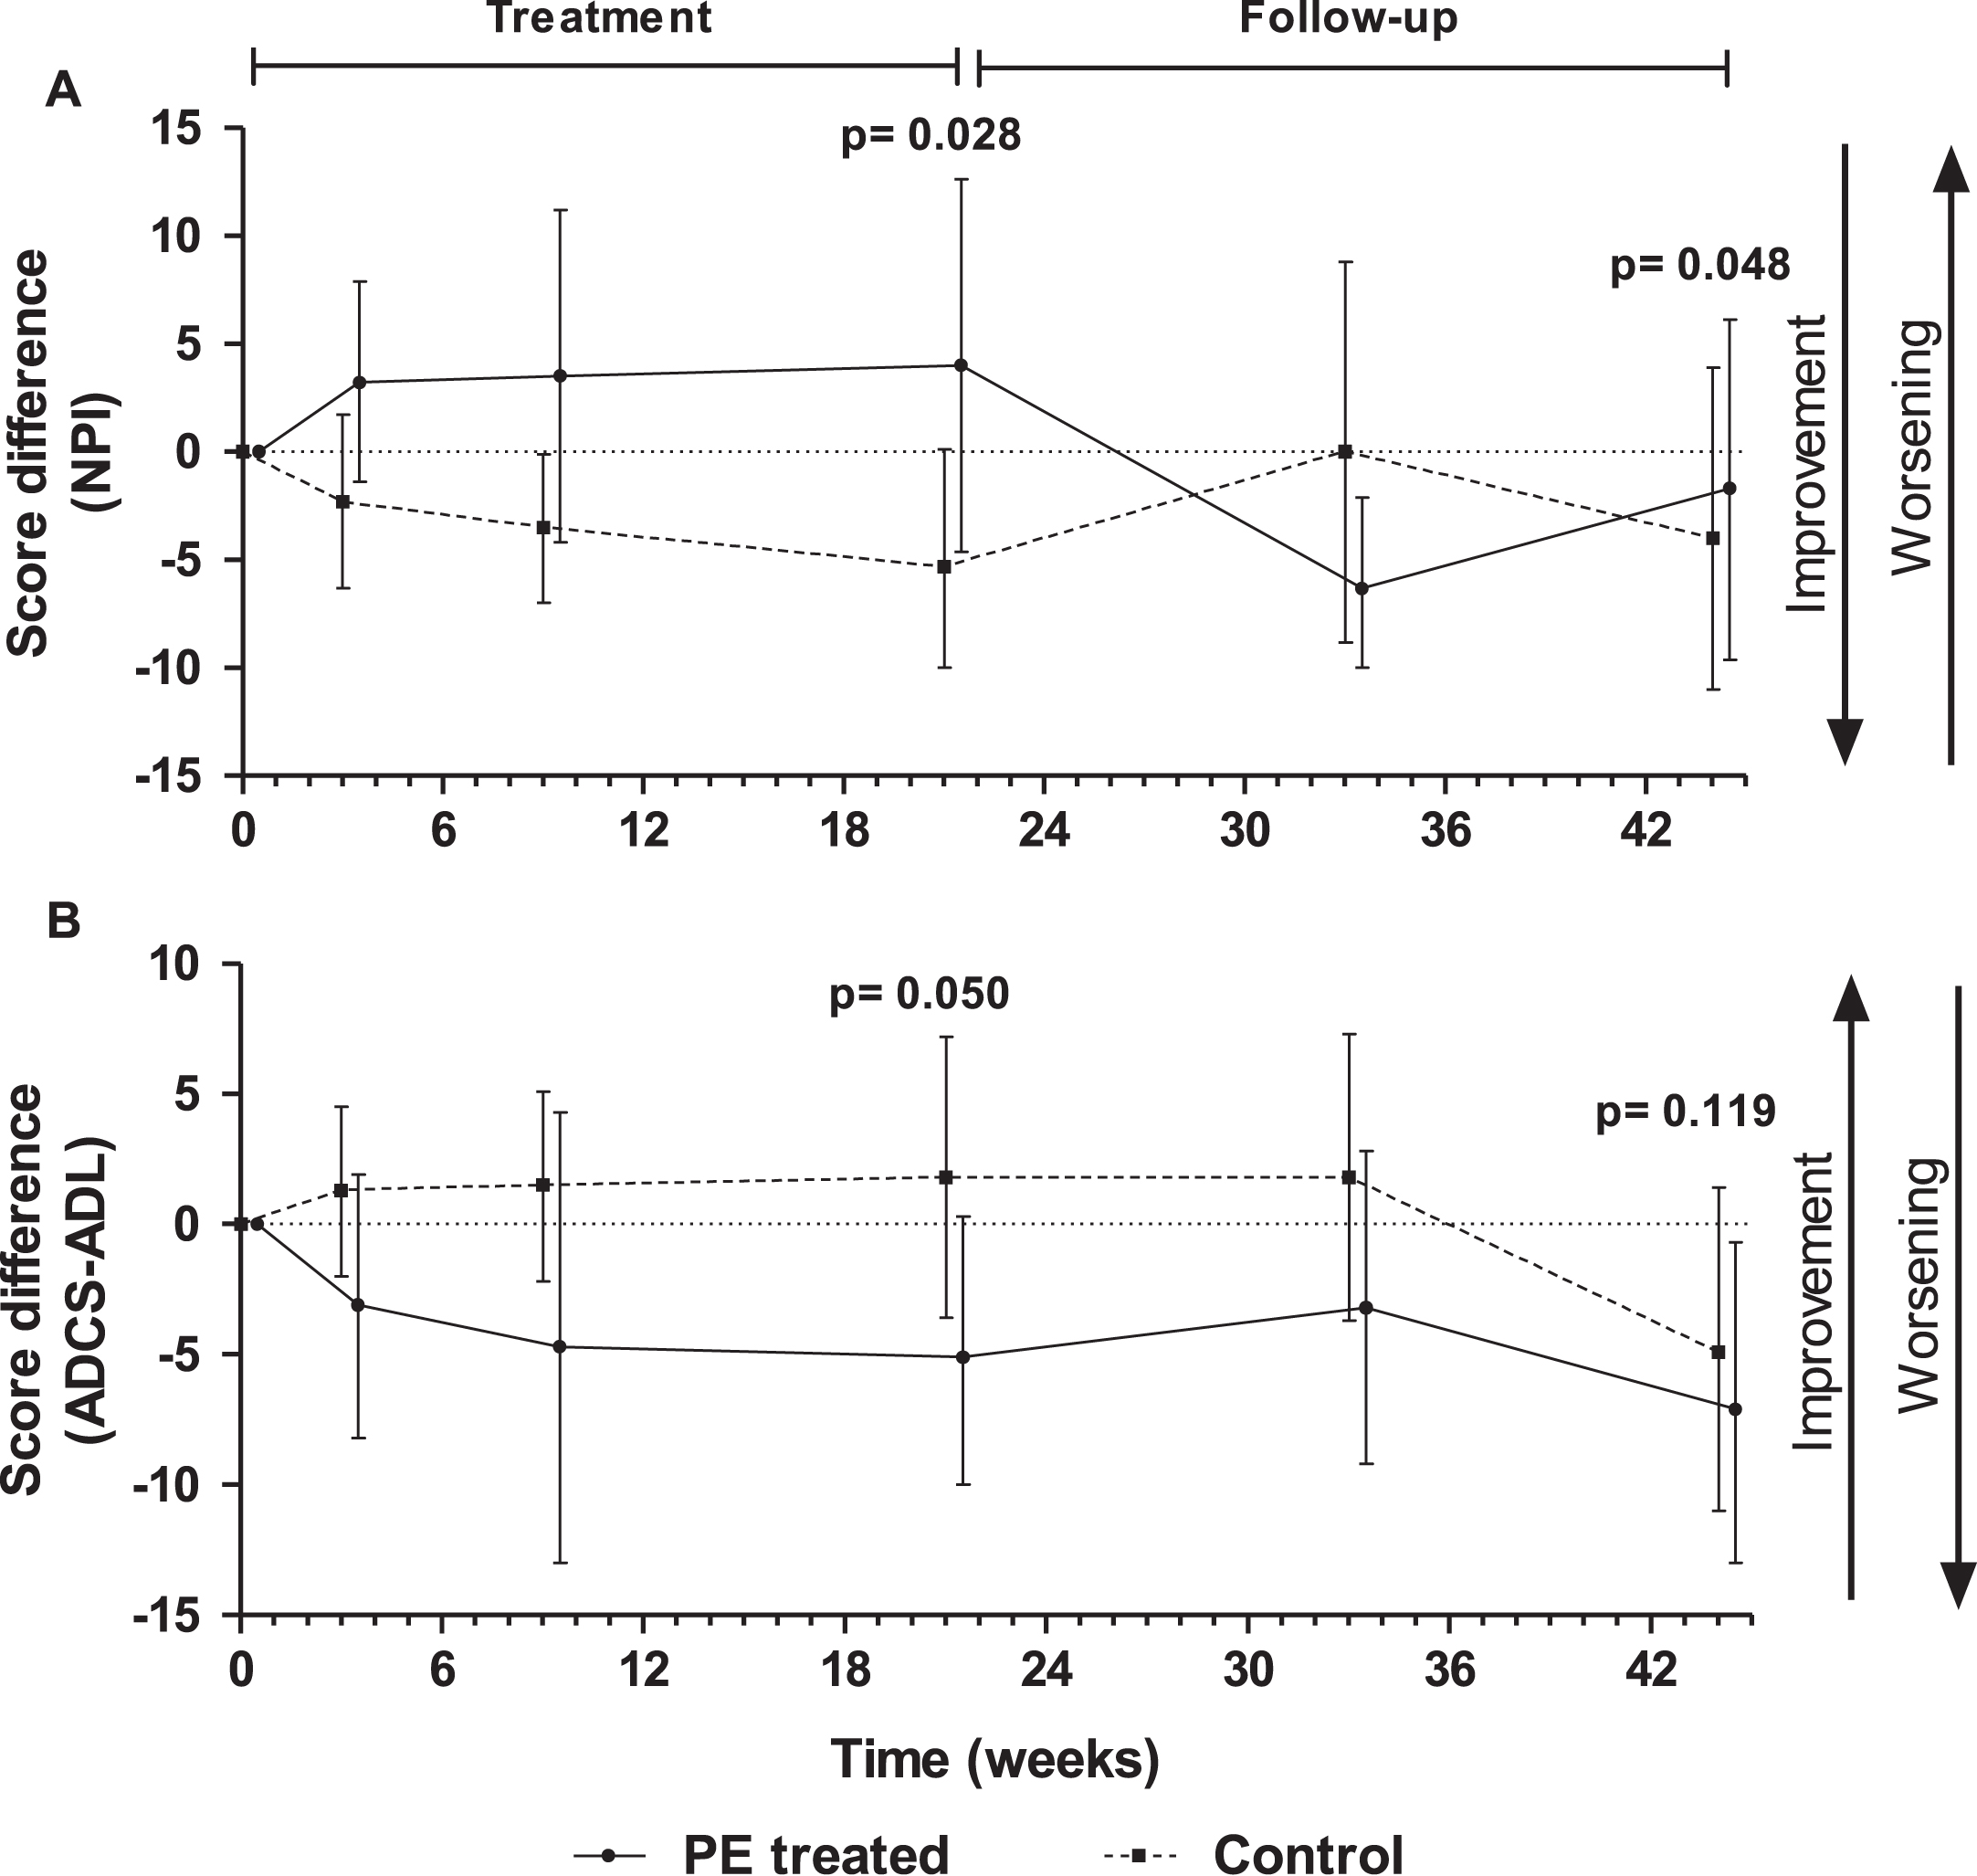 Score differences with respect to baseline in Neuropsychiatric Inventory (NPI) (A) and Alzheimer’s Disease Cooperative Study – Activities of Daily Living (ADCS-ADL) (B) tests measured in plasma exchange (PE)-treated patients and controls (sham PE) (mean±95% CI; N = 18–19; intention-to-treat population). P-values refer to treatment-by-visit effect in NPI and to treatment effect in ADCS-ADL.